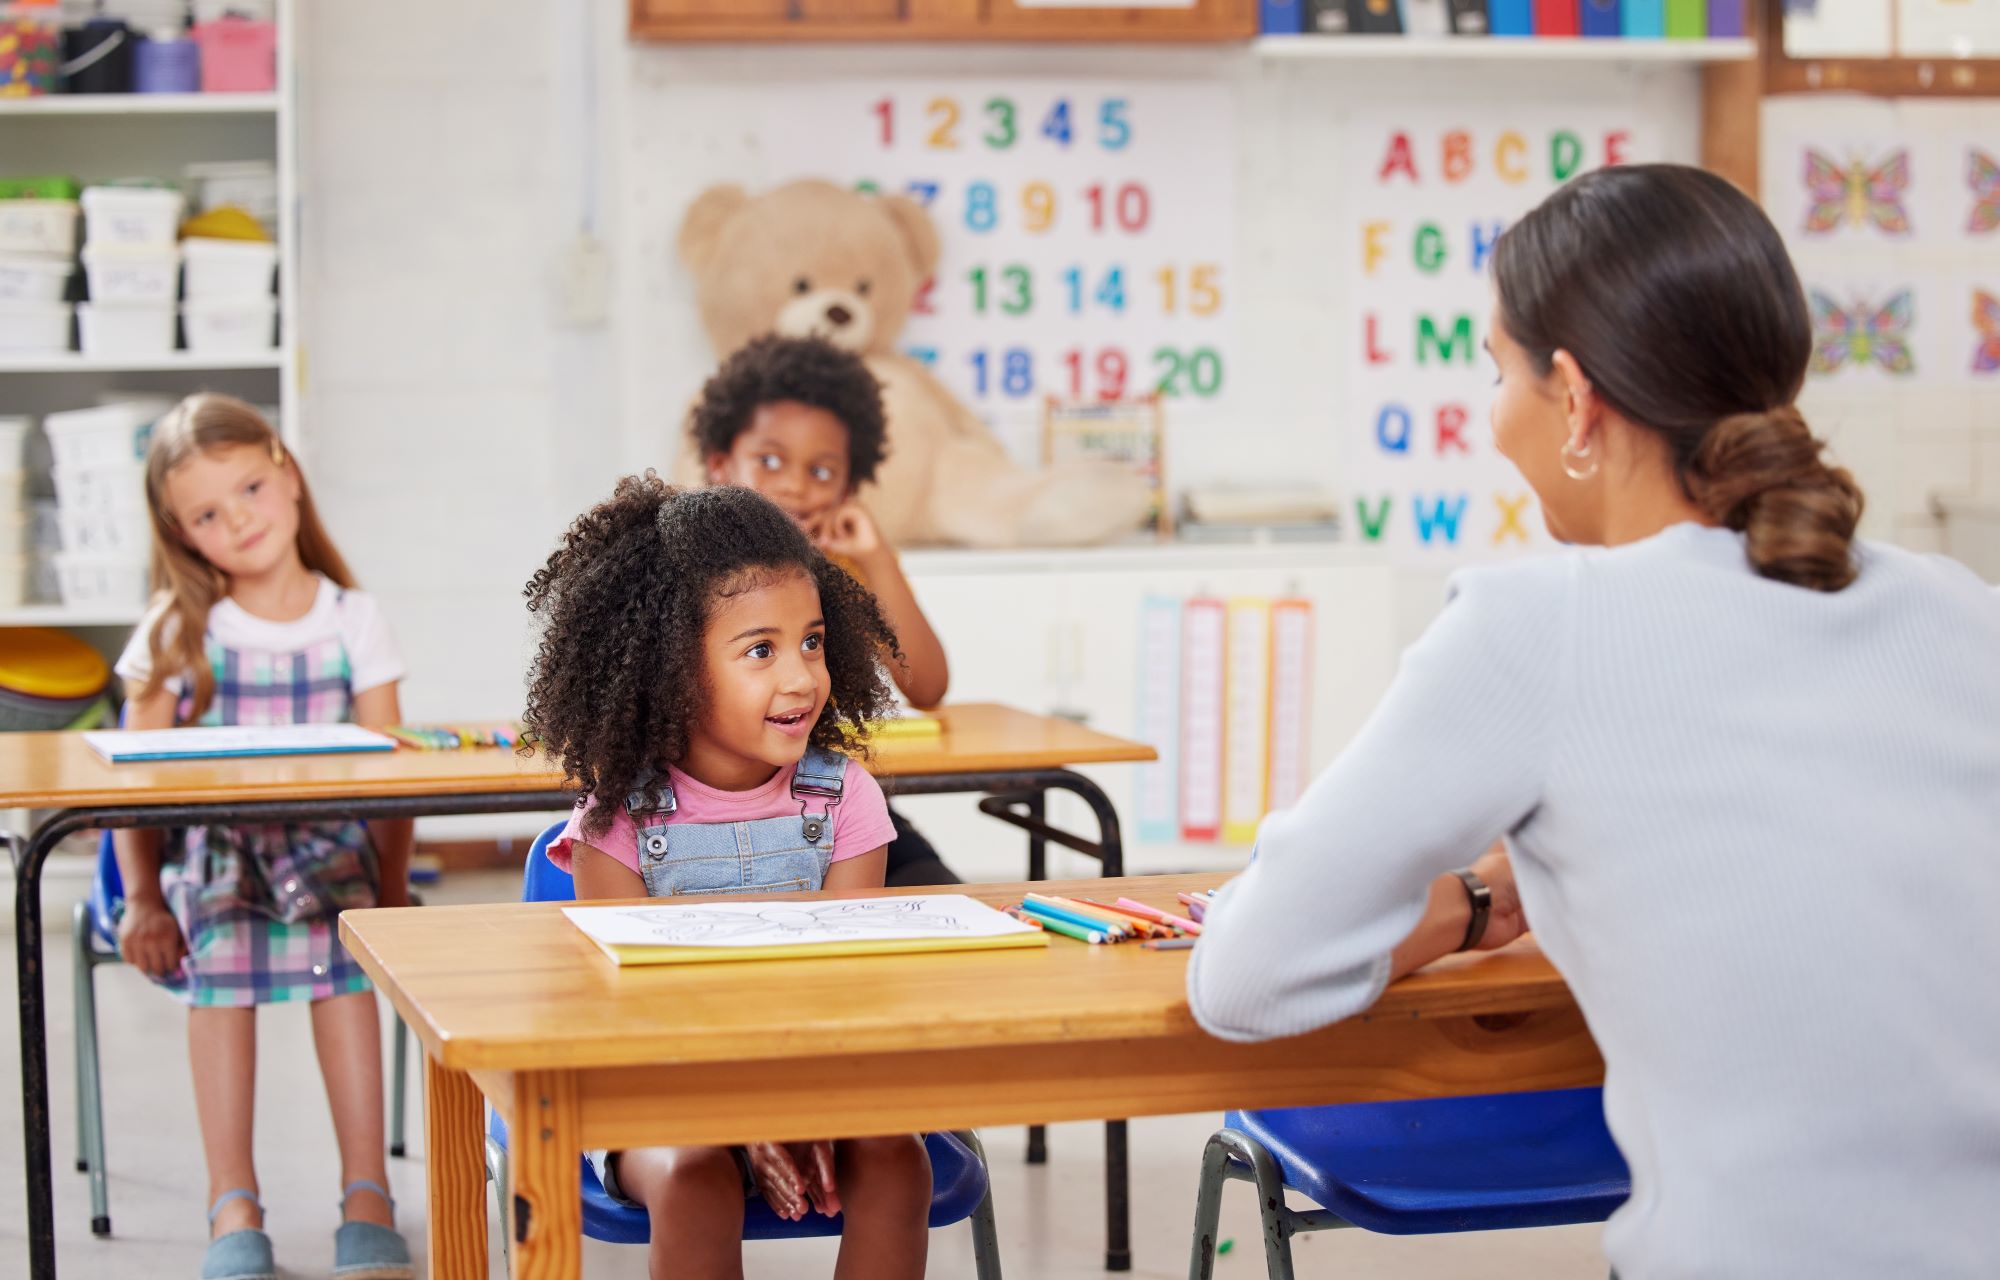 The impact preschool classroom furniture has on learning